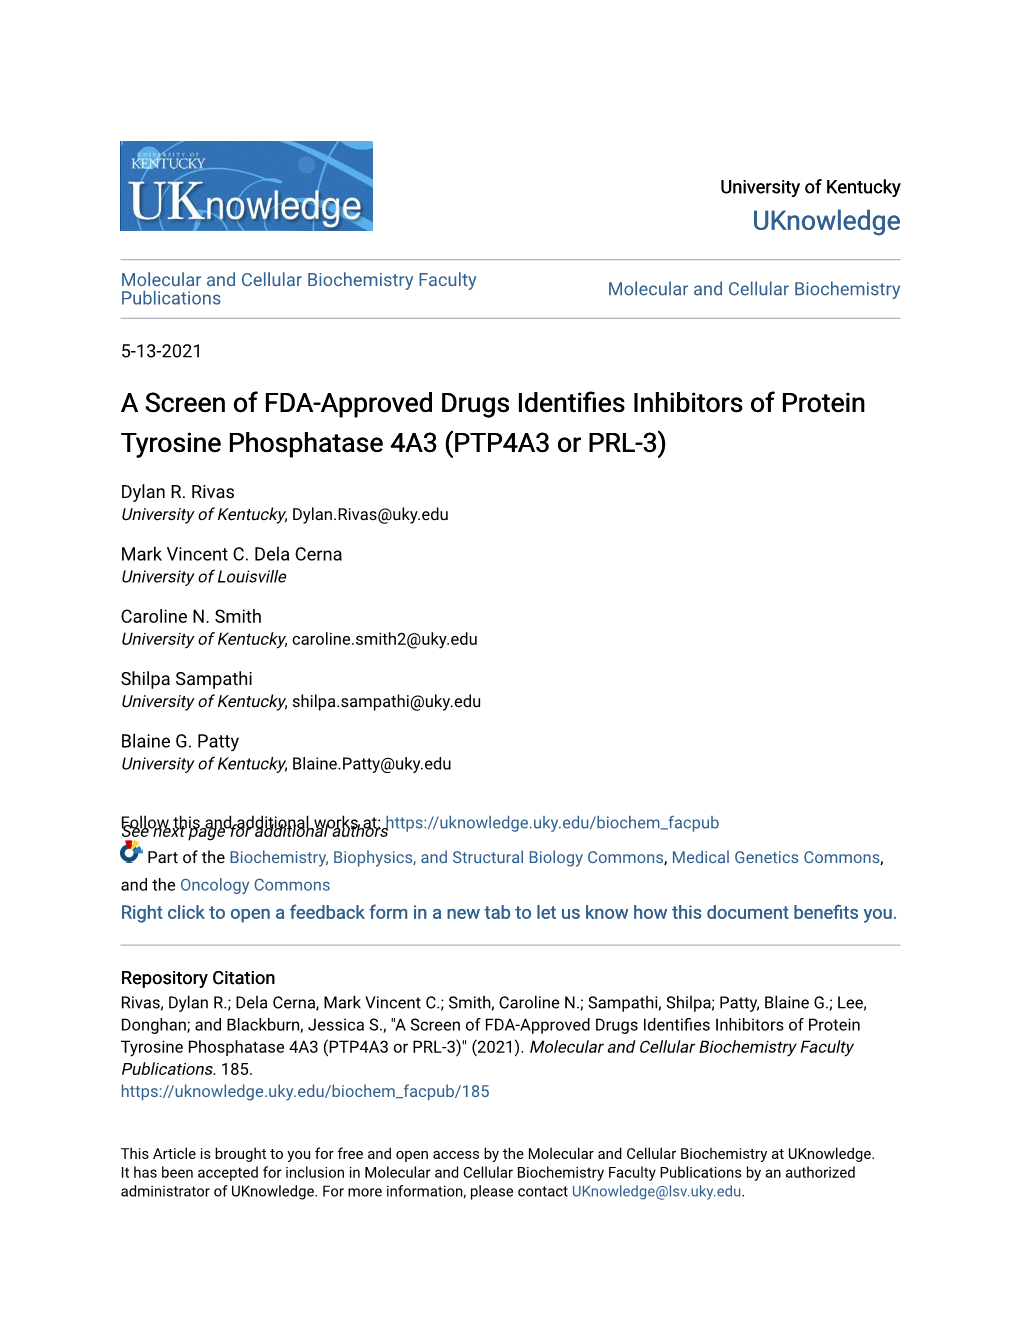 A Screen of FDA-Approved Drugs Identifies Inhibitors of Protein Tyrosine Phosphatase 4A3 (PTP4A3 Or PRL-3)